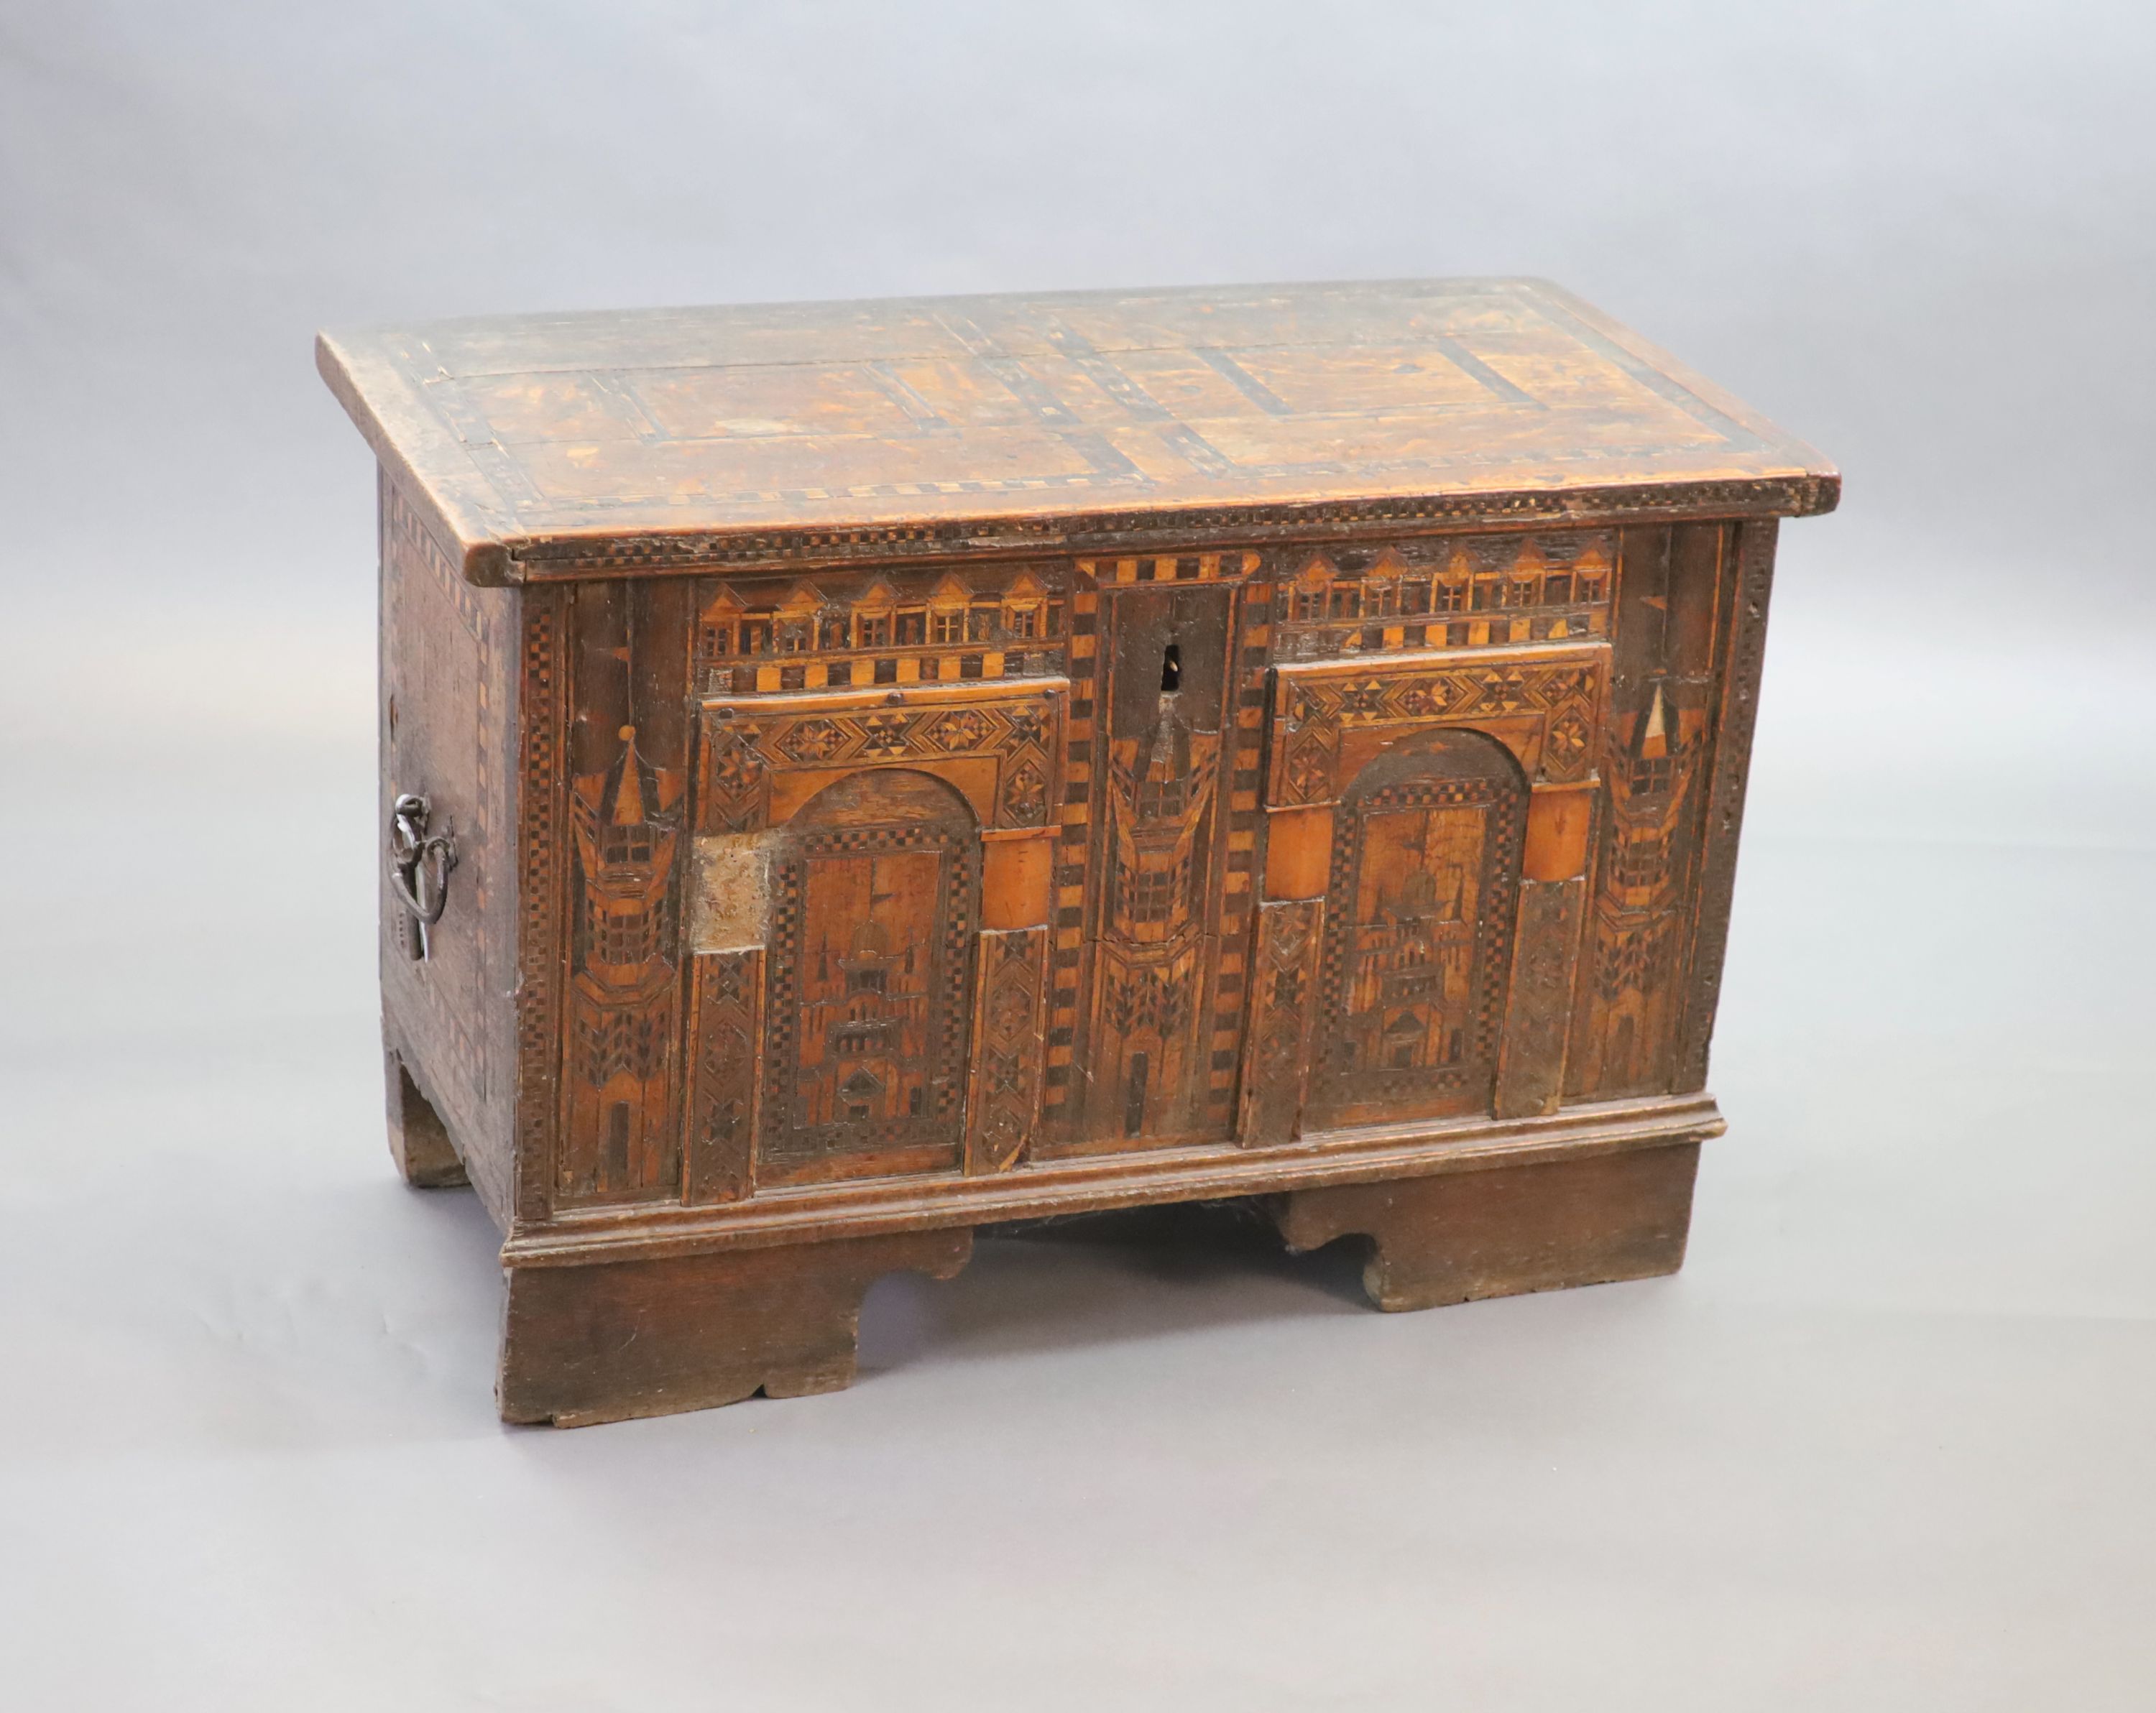 A late 16th century Anglo-German ‘Nonesuch’ chest, 95cm wide, 49cm deep, 65cm high